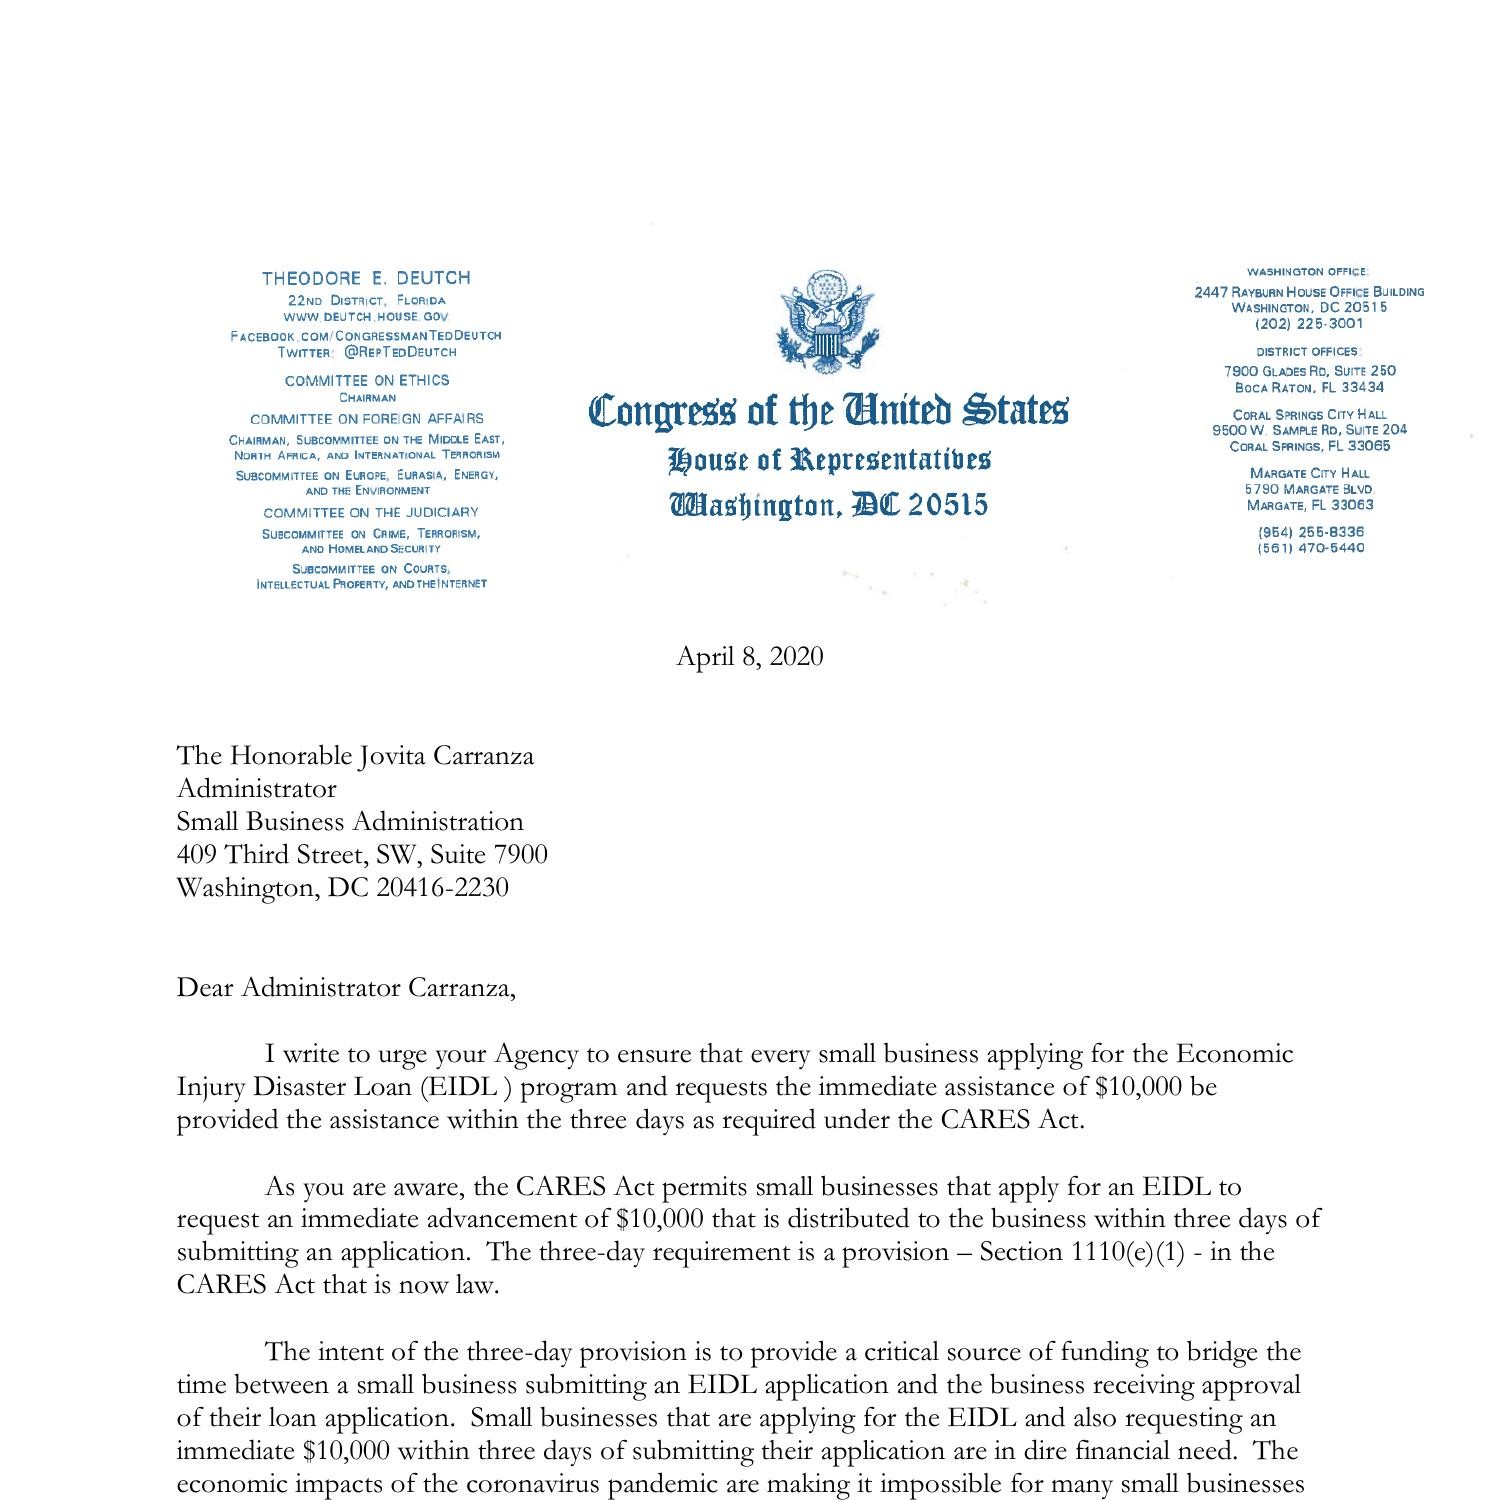 Democrats Letters to SBA RE EIDL-PPP 4-2-2020.pdf | DocDroid